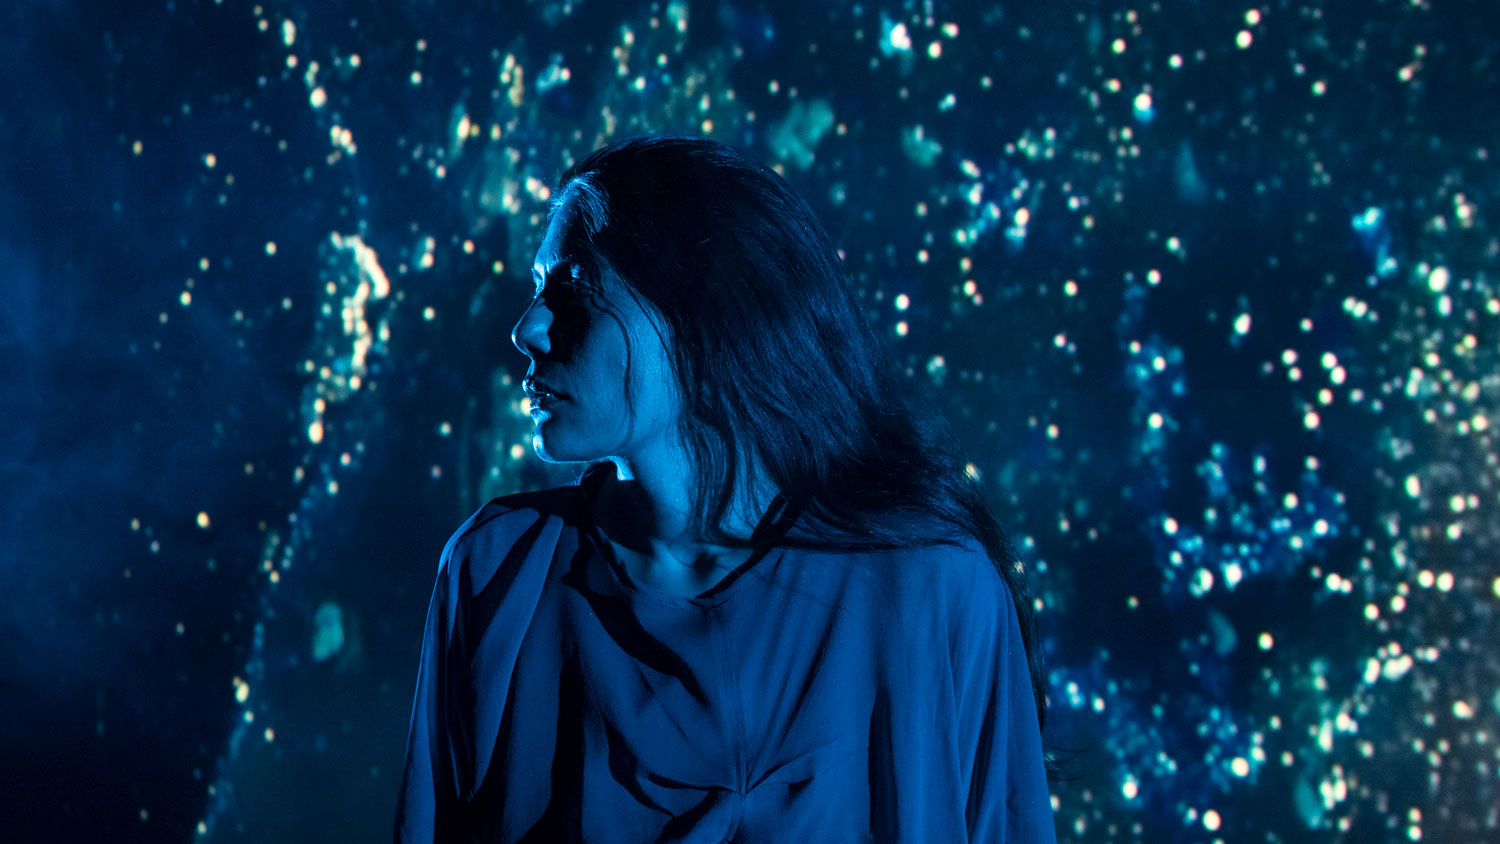 A female performer with long dark hair and wearing draped fabric looks over her shoulder in a room filled with blue starry light. 